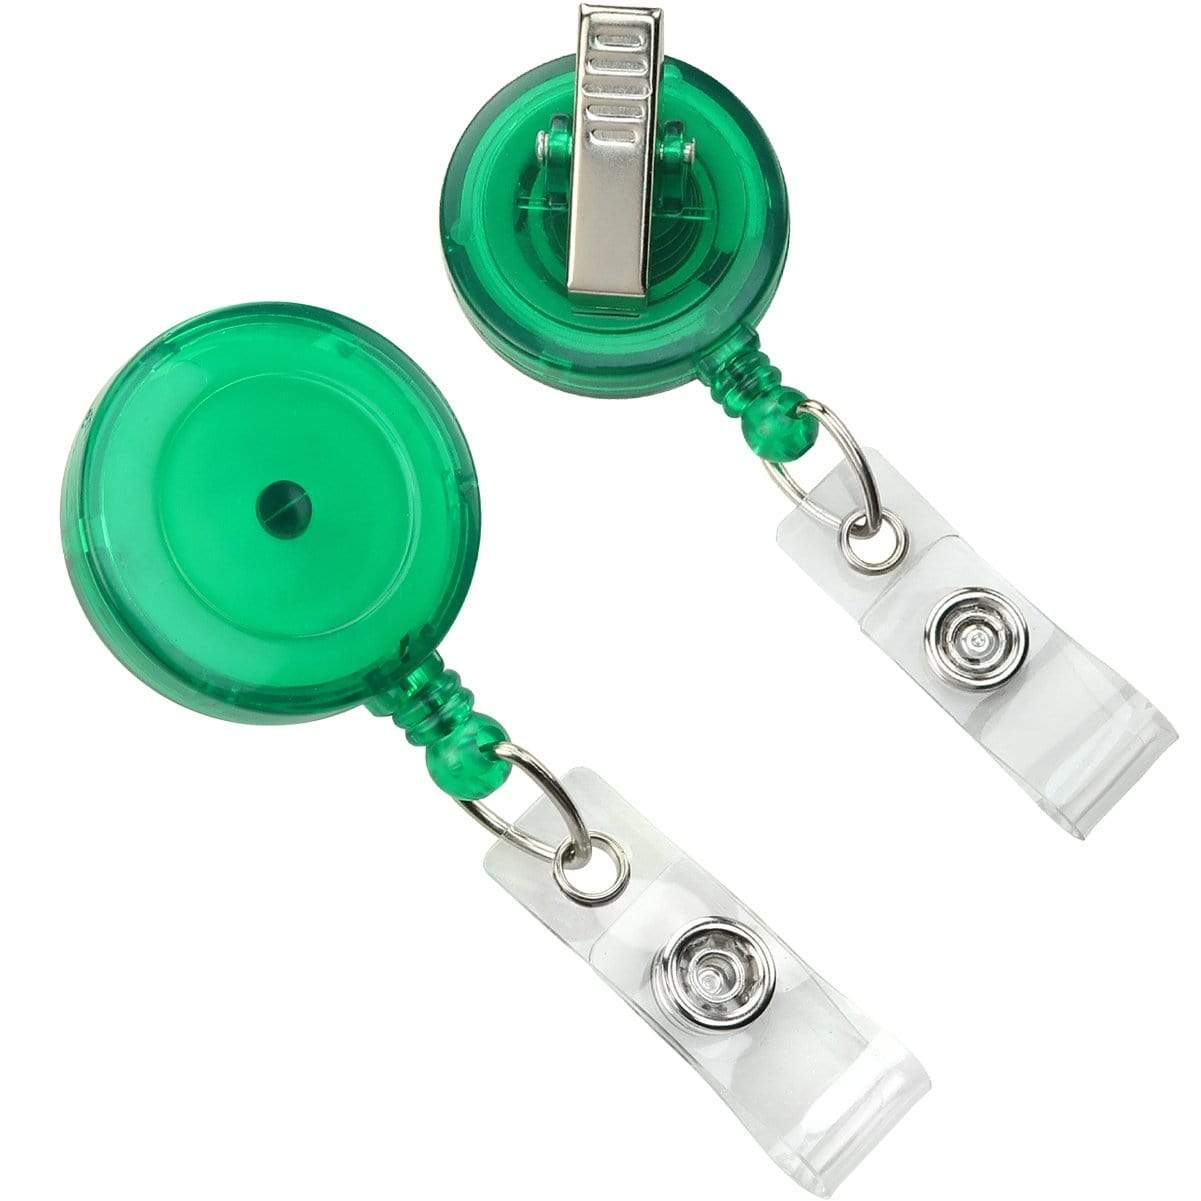 Translucent Green Translucent Badge Reel with Swivel Clip (P/N 2120-762X) 2120-7624